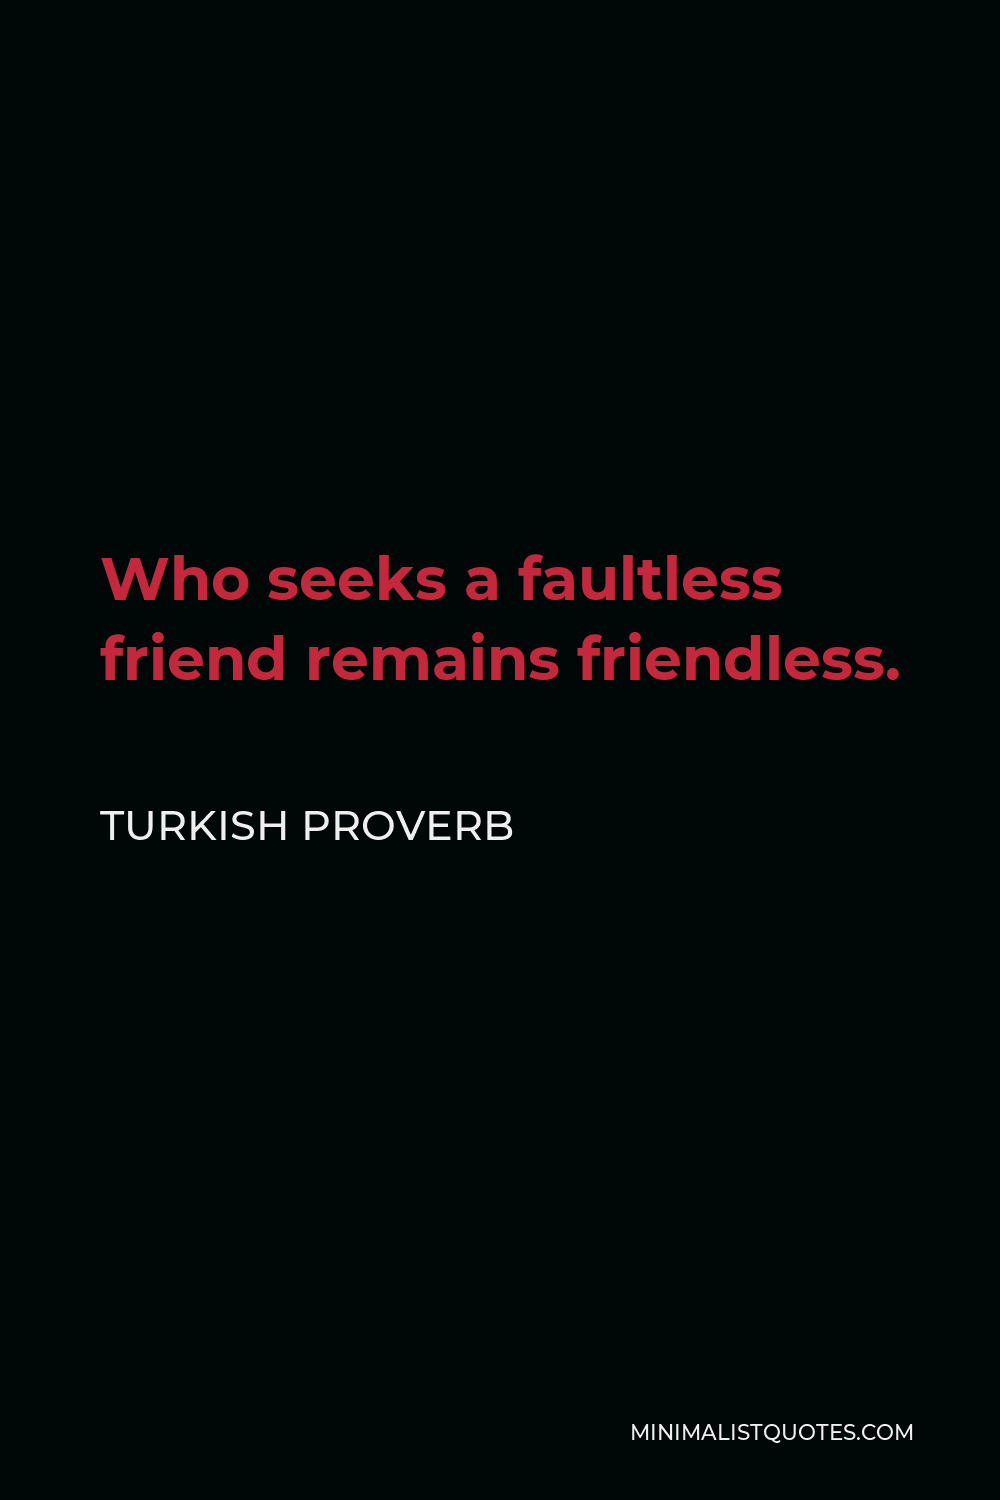 Turkish Proverb Quote - Who seeks a faultless friend remains friendless.